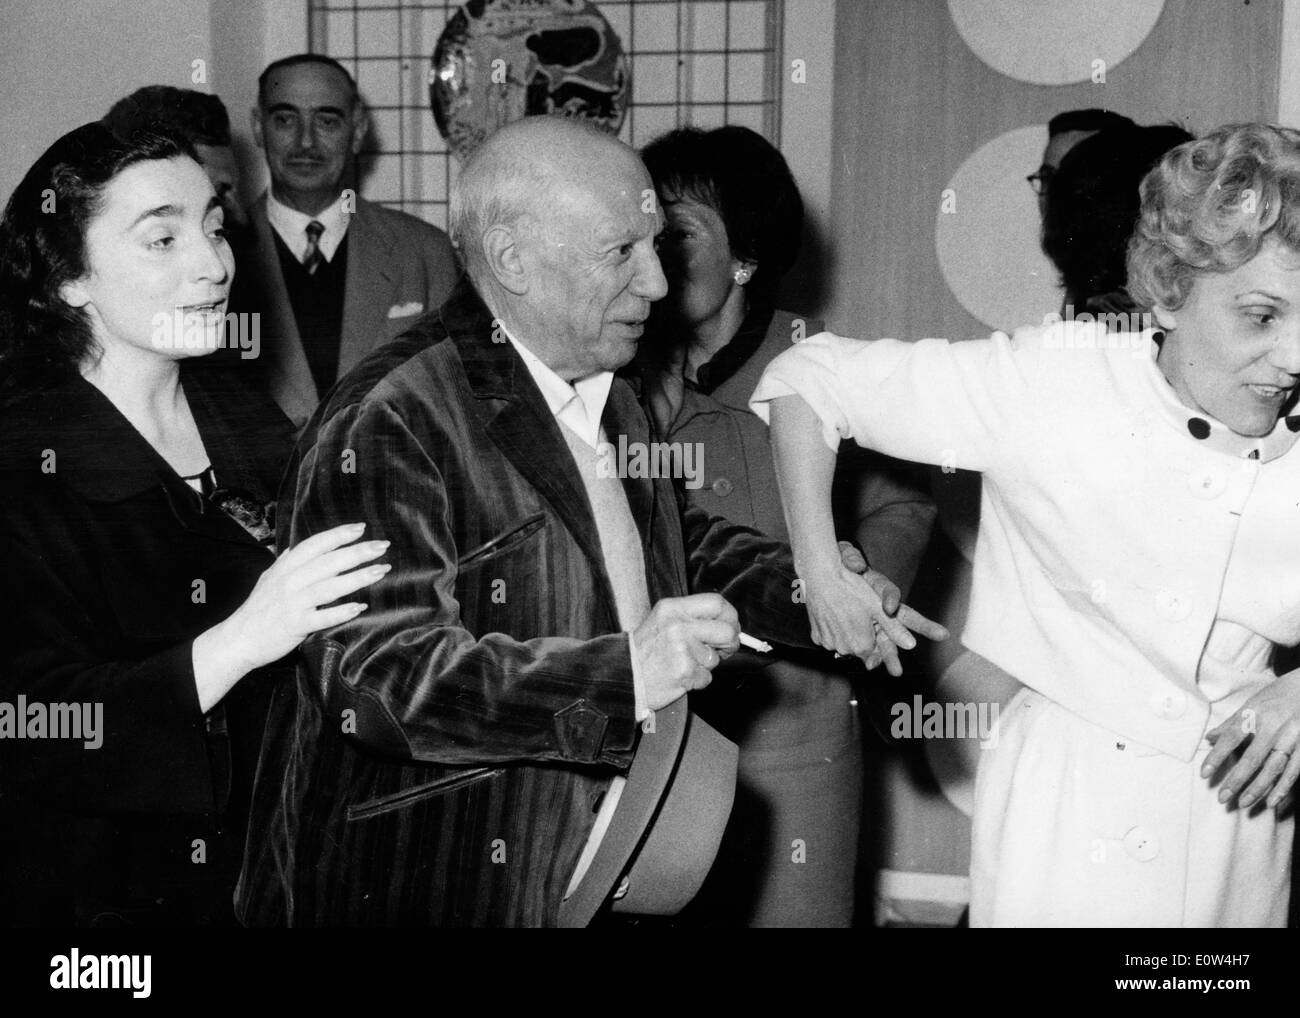 Artist Pablo Picasso with Mademoiselle Ramier and his wife Jacqueline Roque at his gallery exhibition Stock Photo